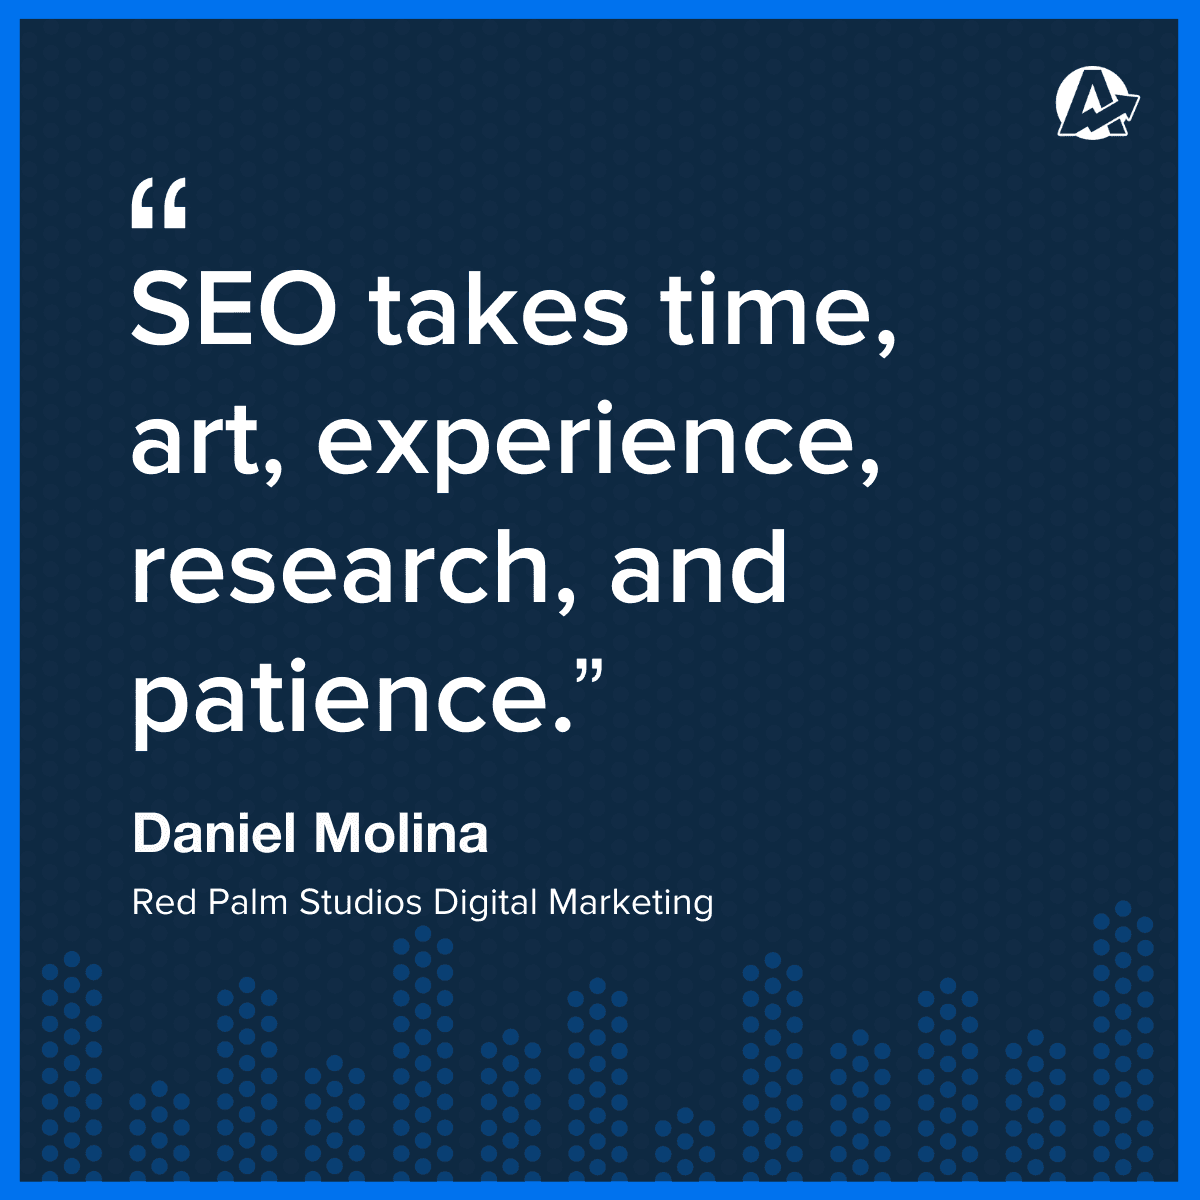 inspirational quote about SEO from an agency owner saying that SEO takes time, art, experience, research, and patience 